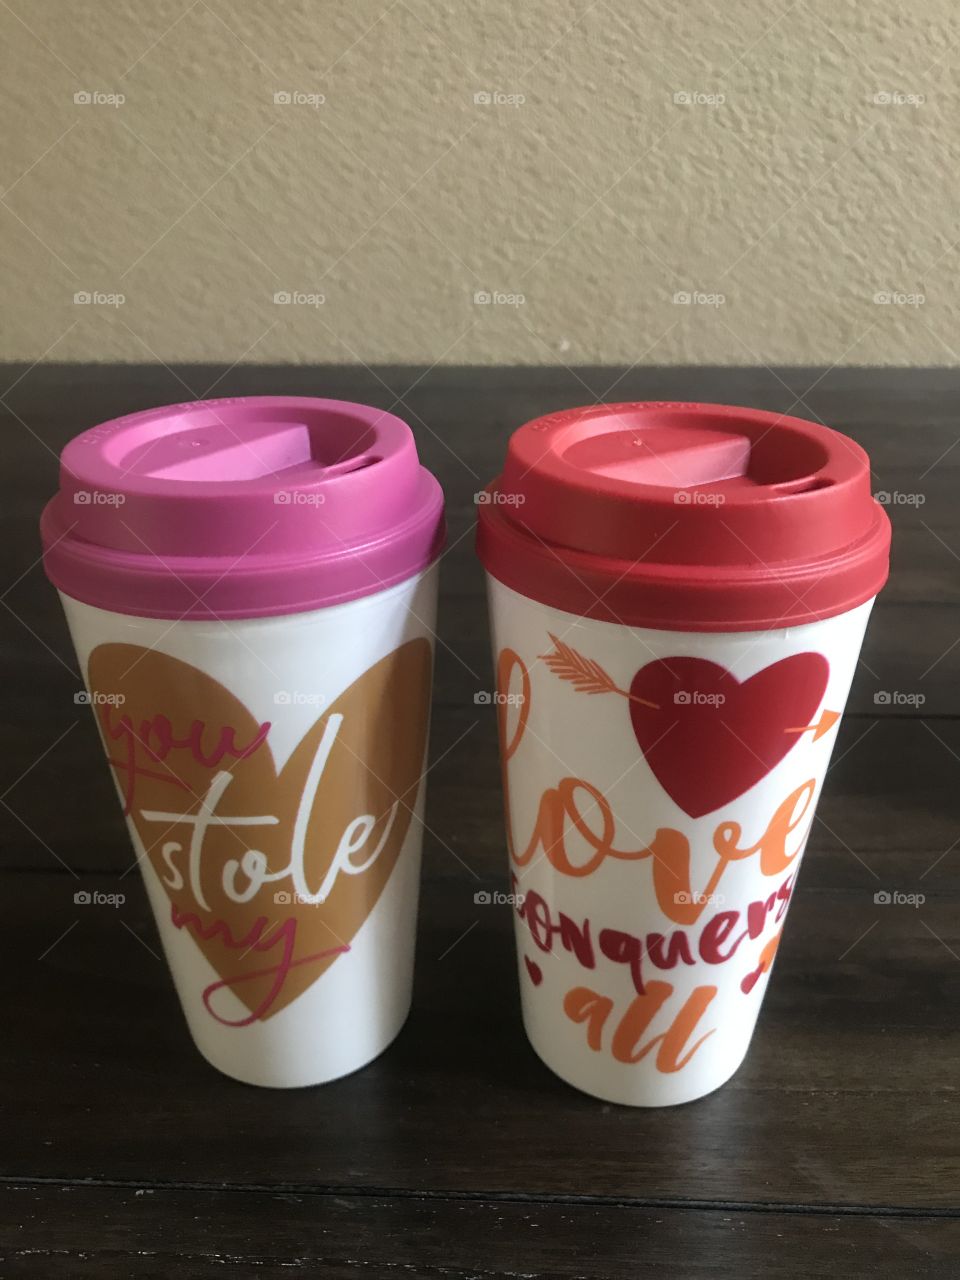 Two Valentine’s Day pink and red coffee mugs one saying love conquers all and the other saying you stole my heart. USA, America 